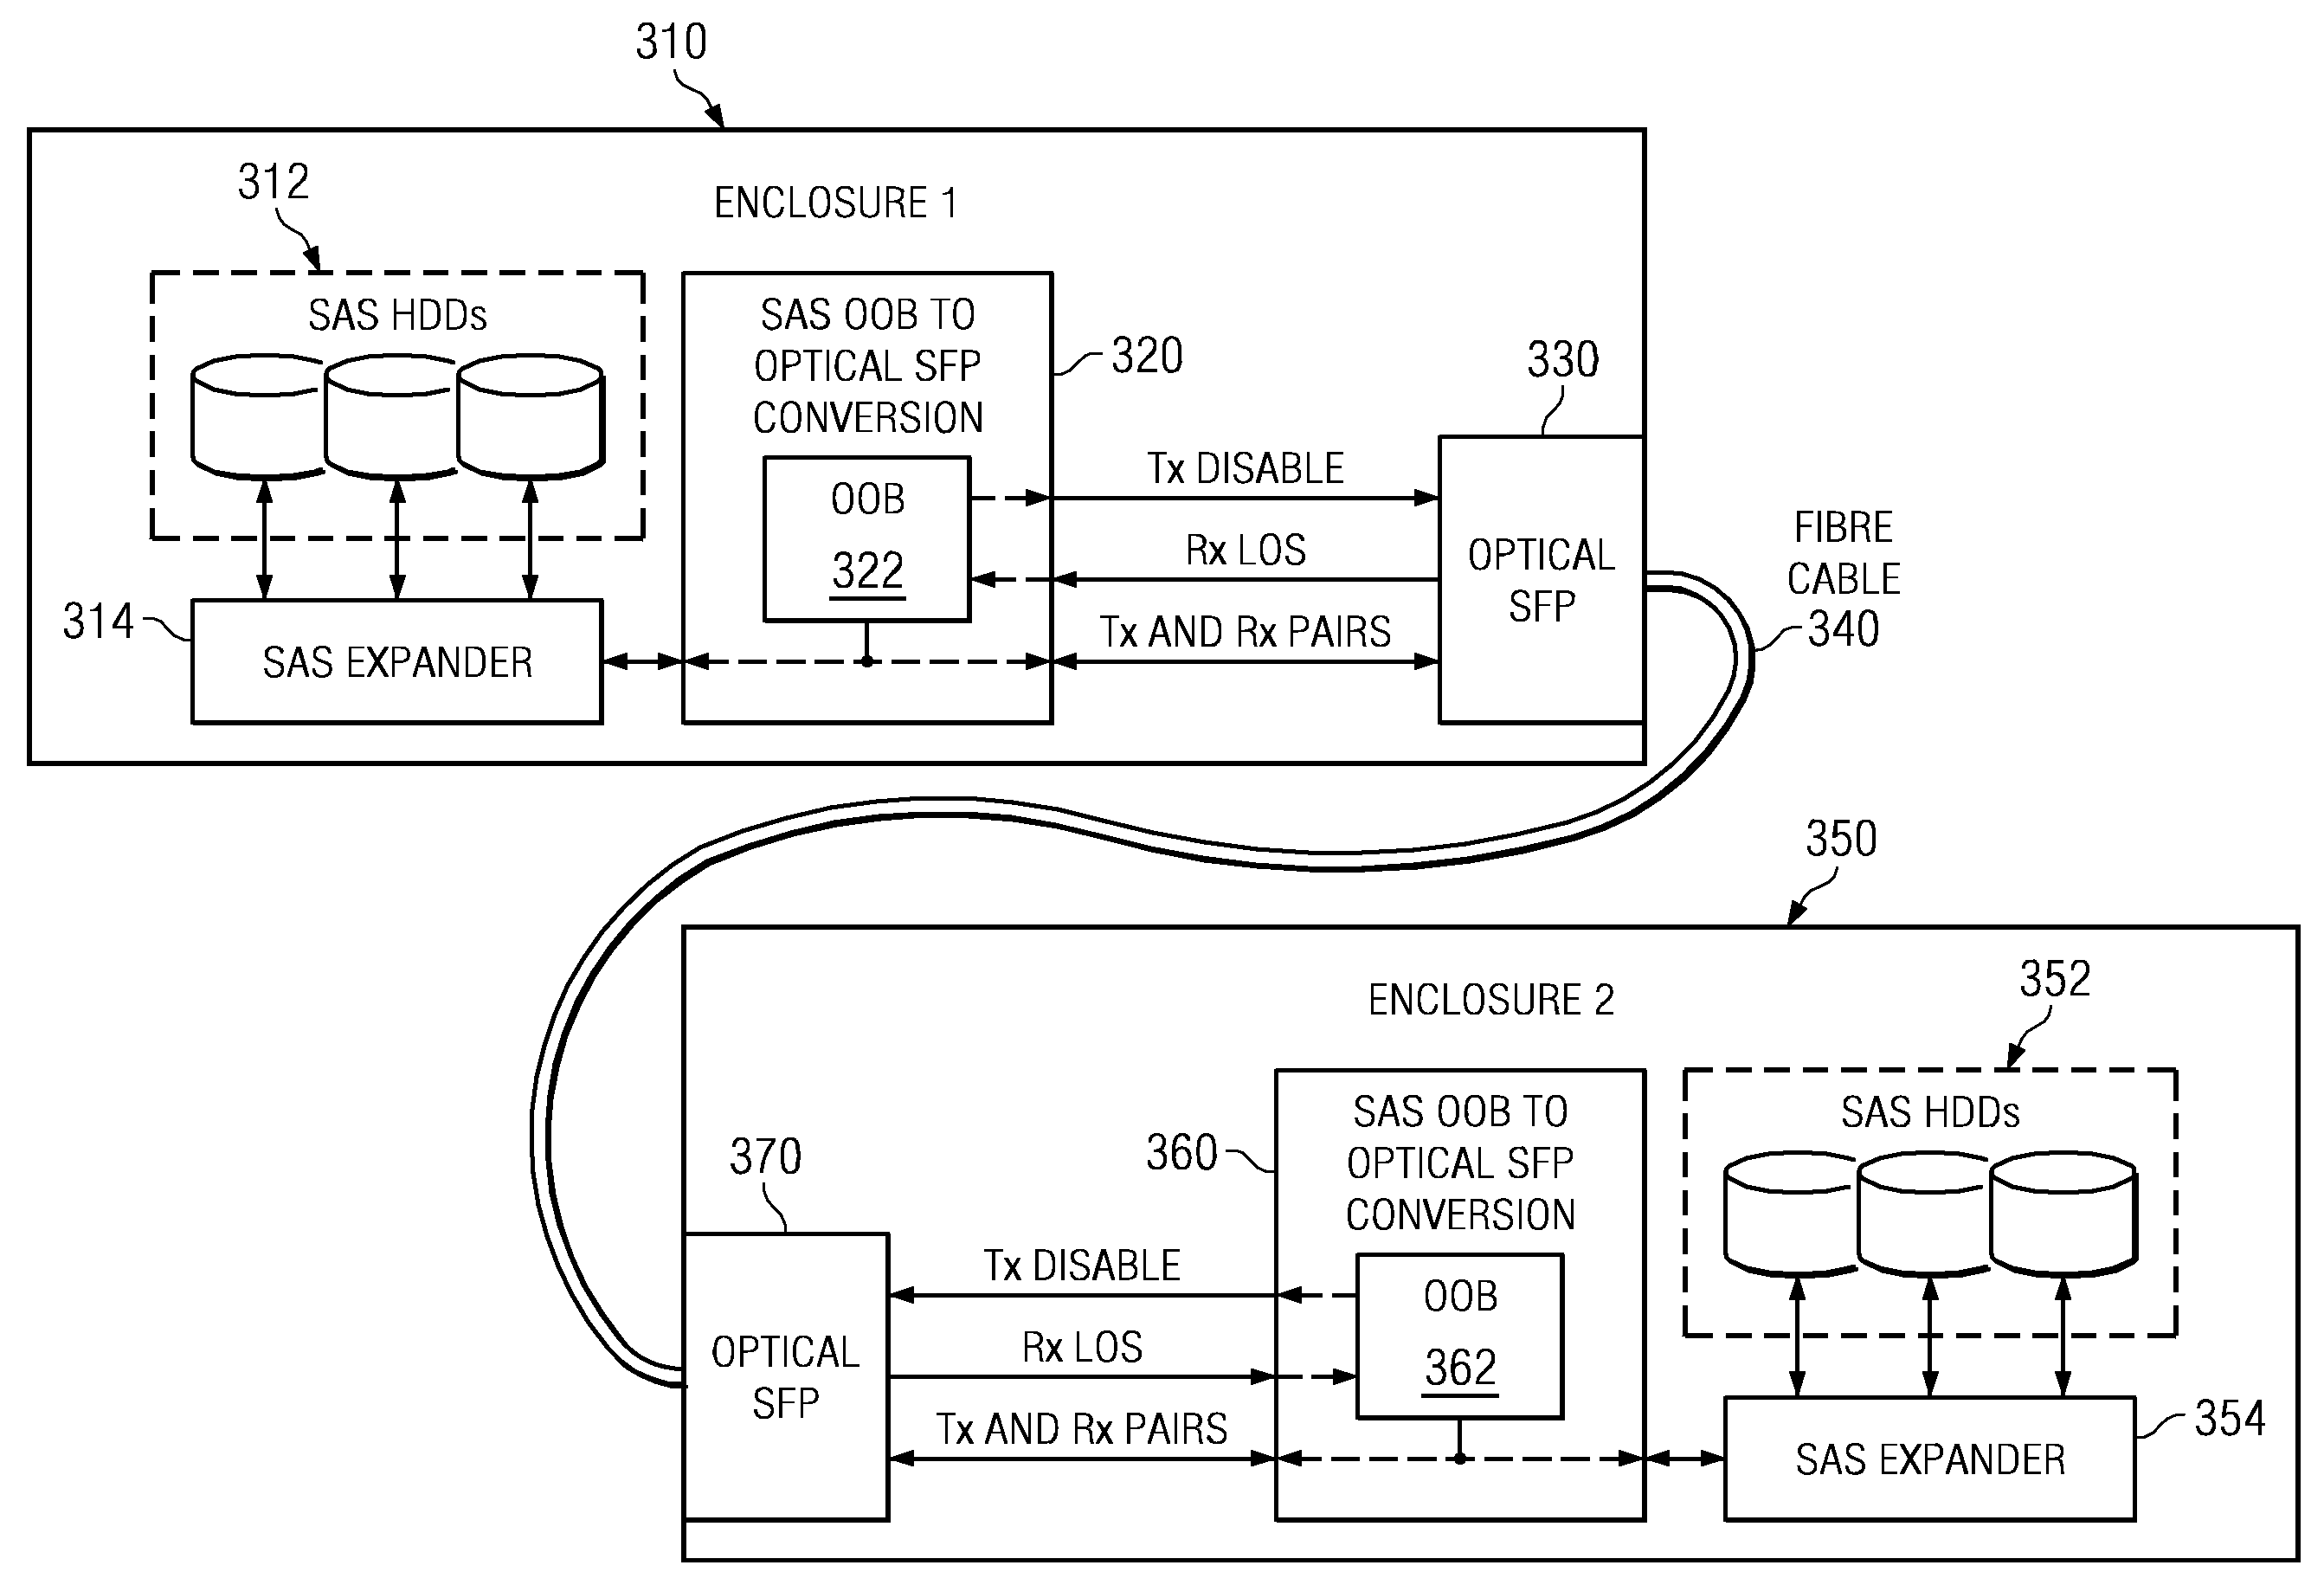 Out-of-Band Signaling Support Over Standard Optical SFP